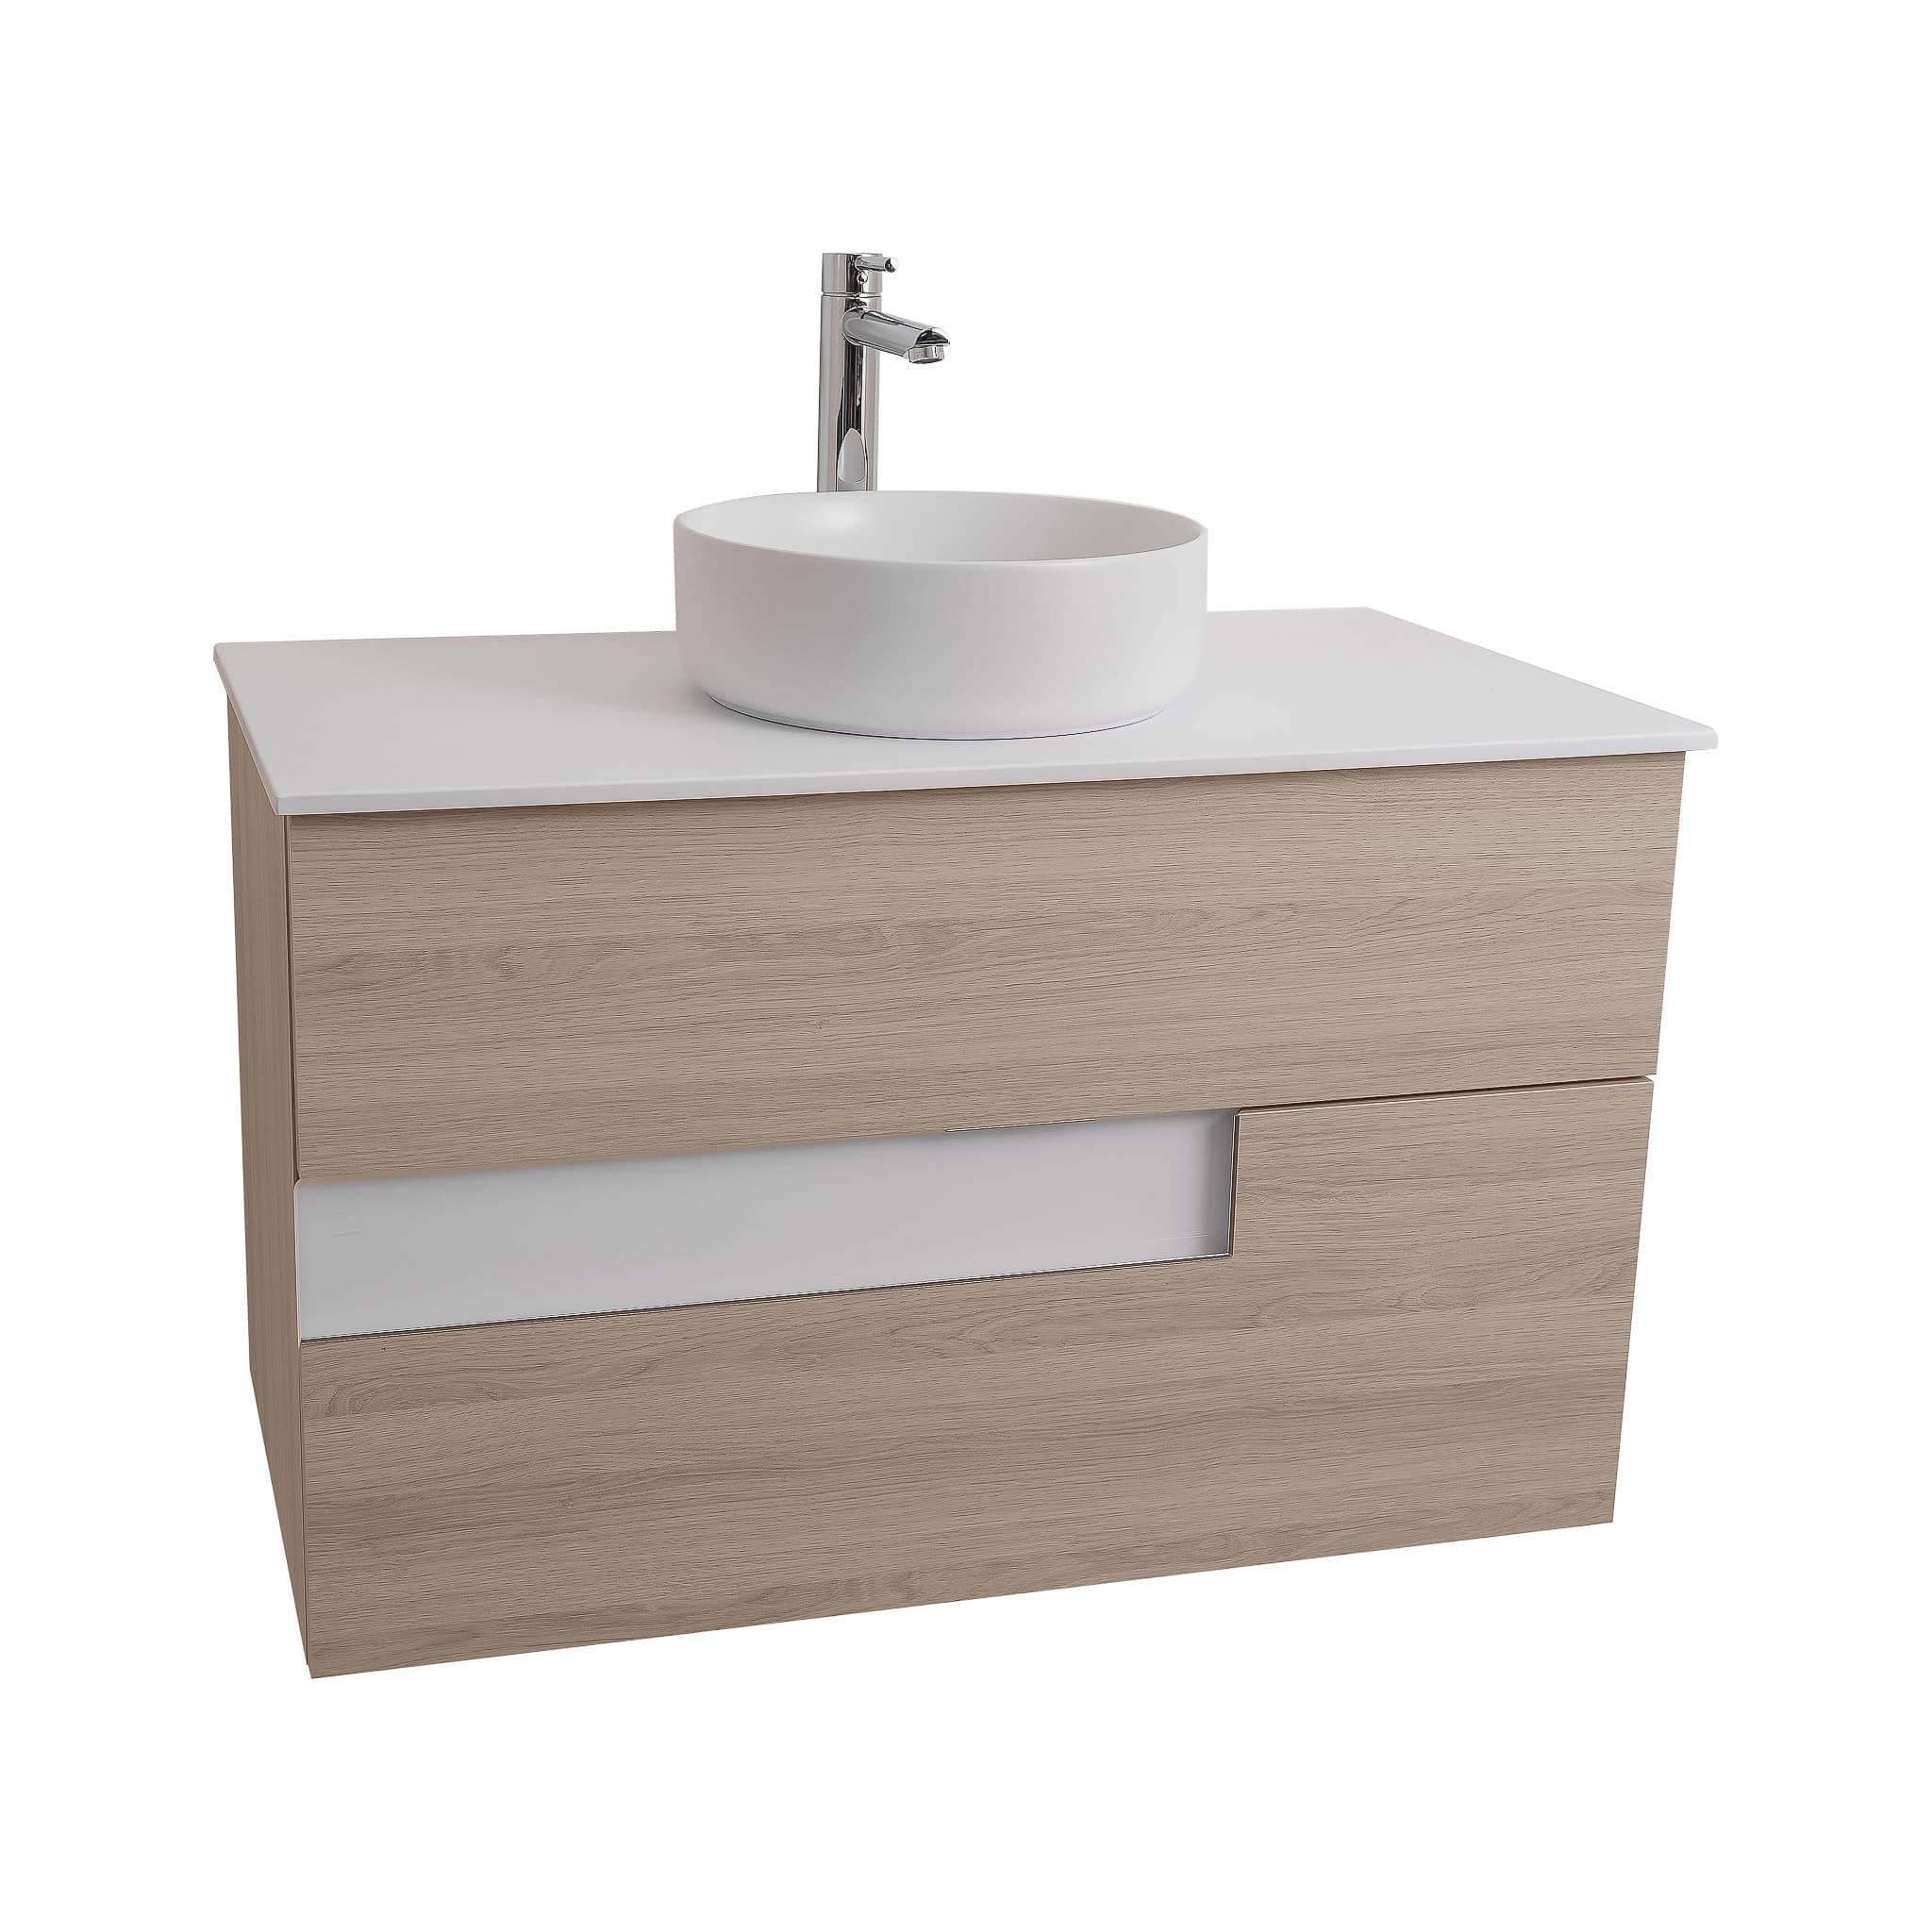 Vision 31.5 Natural Light Wood Cabinet, Ares White Top And Ares White Ceramic Basin, Wall Mounted Modern Vanity Set